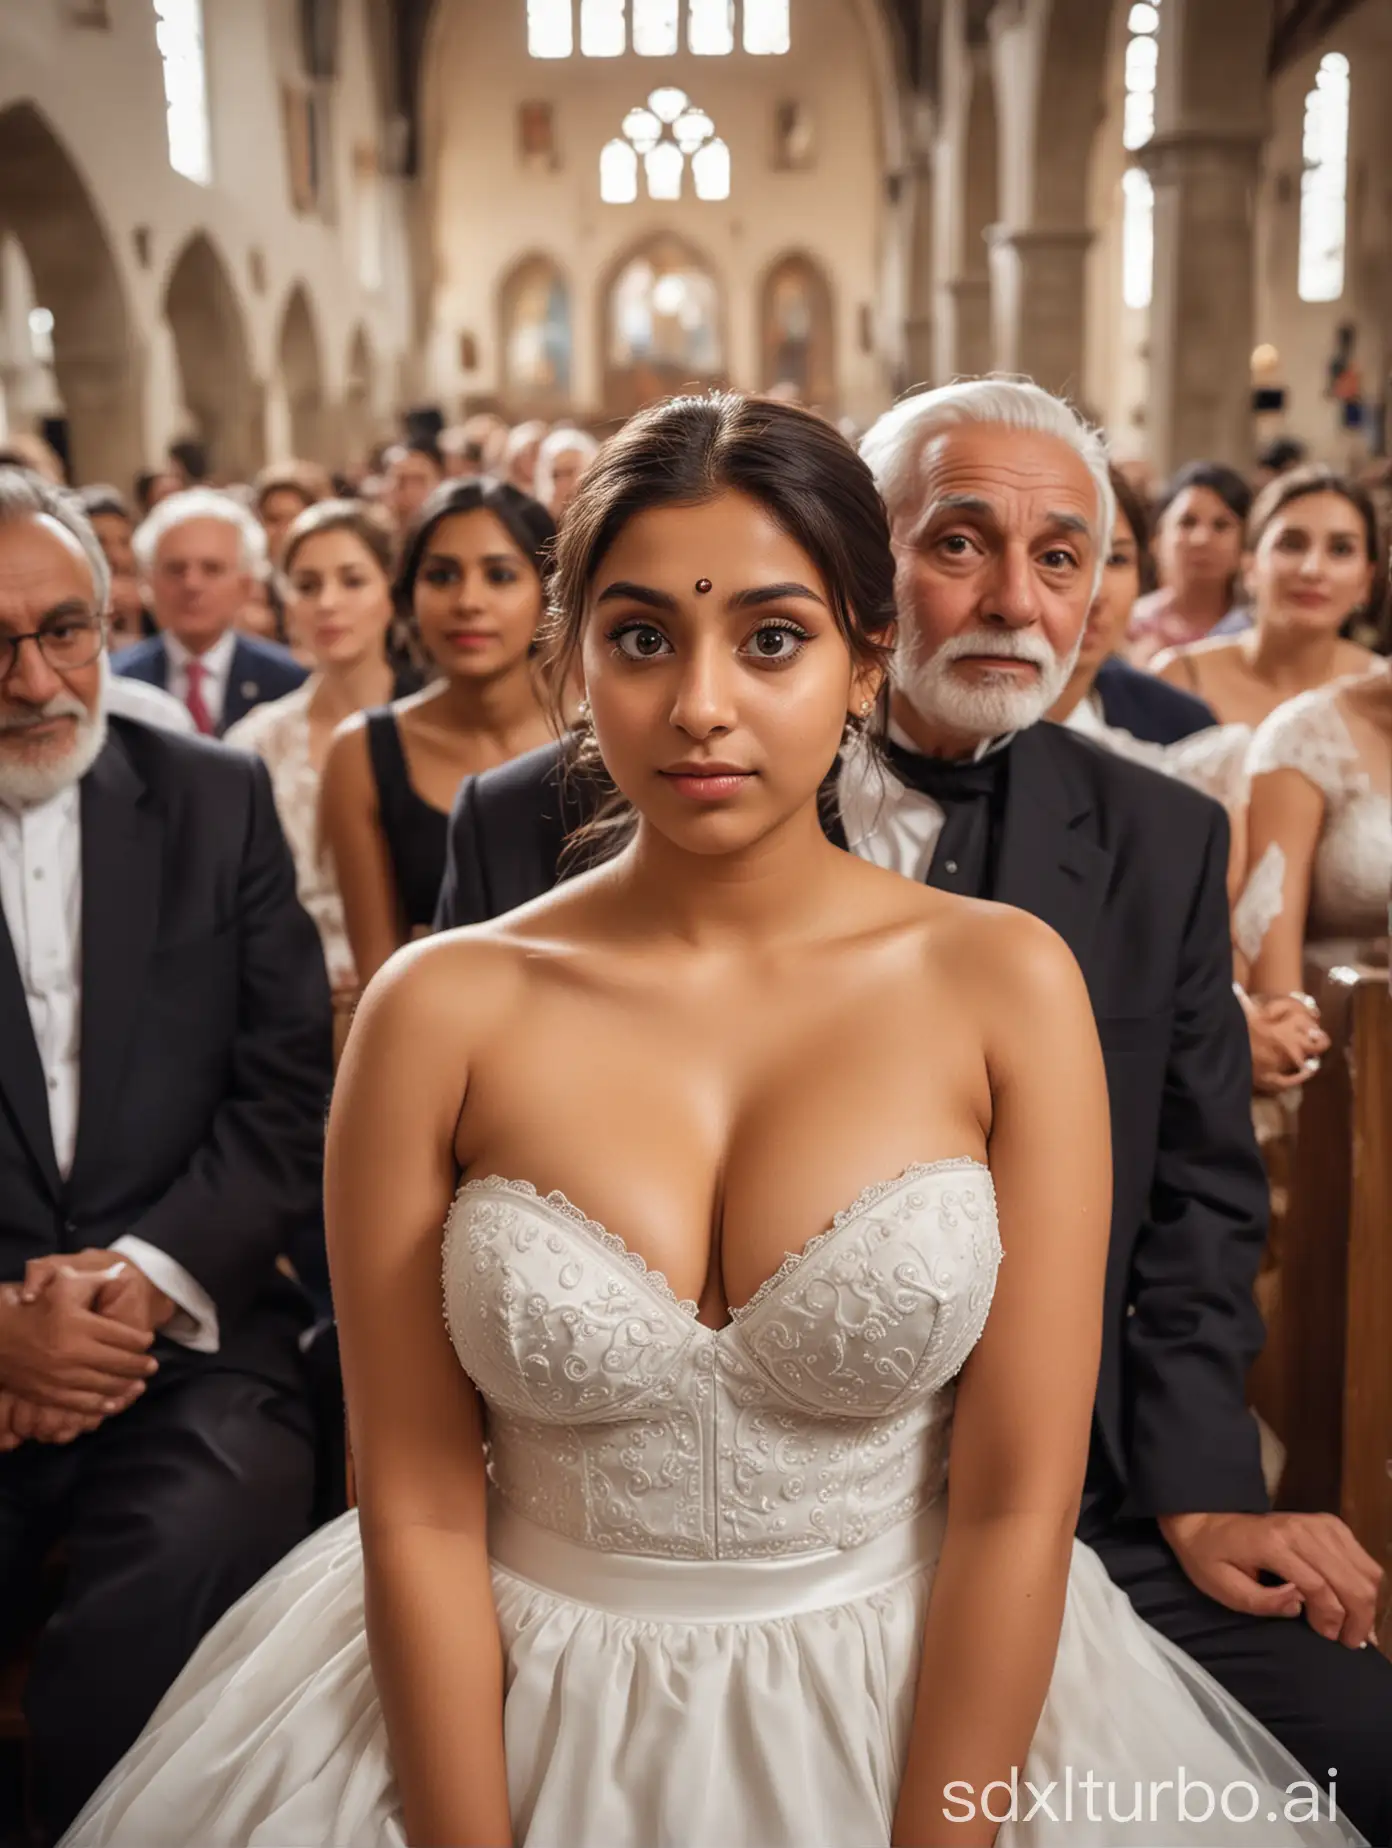 CURVY Indian church bride with large breasts and flat belly, with Plump female body and hair bun, with white strapless bra with deep v neckline and low-waisted bridal skirt, she has a busty body, is sitting and hugging an old man who is wearing a black blazer. They are in a well-lit crowded church hall. Crowd is watching them. Big eyes, blurred background, ultra focus, face illuminated, face detailed, 16k resolution, full body view